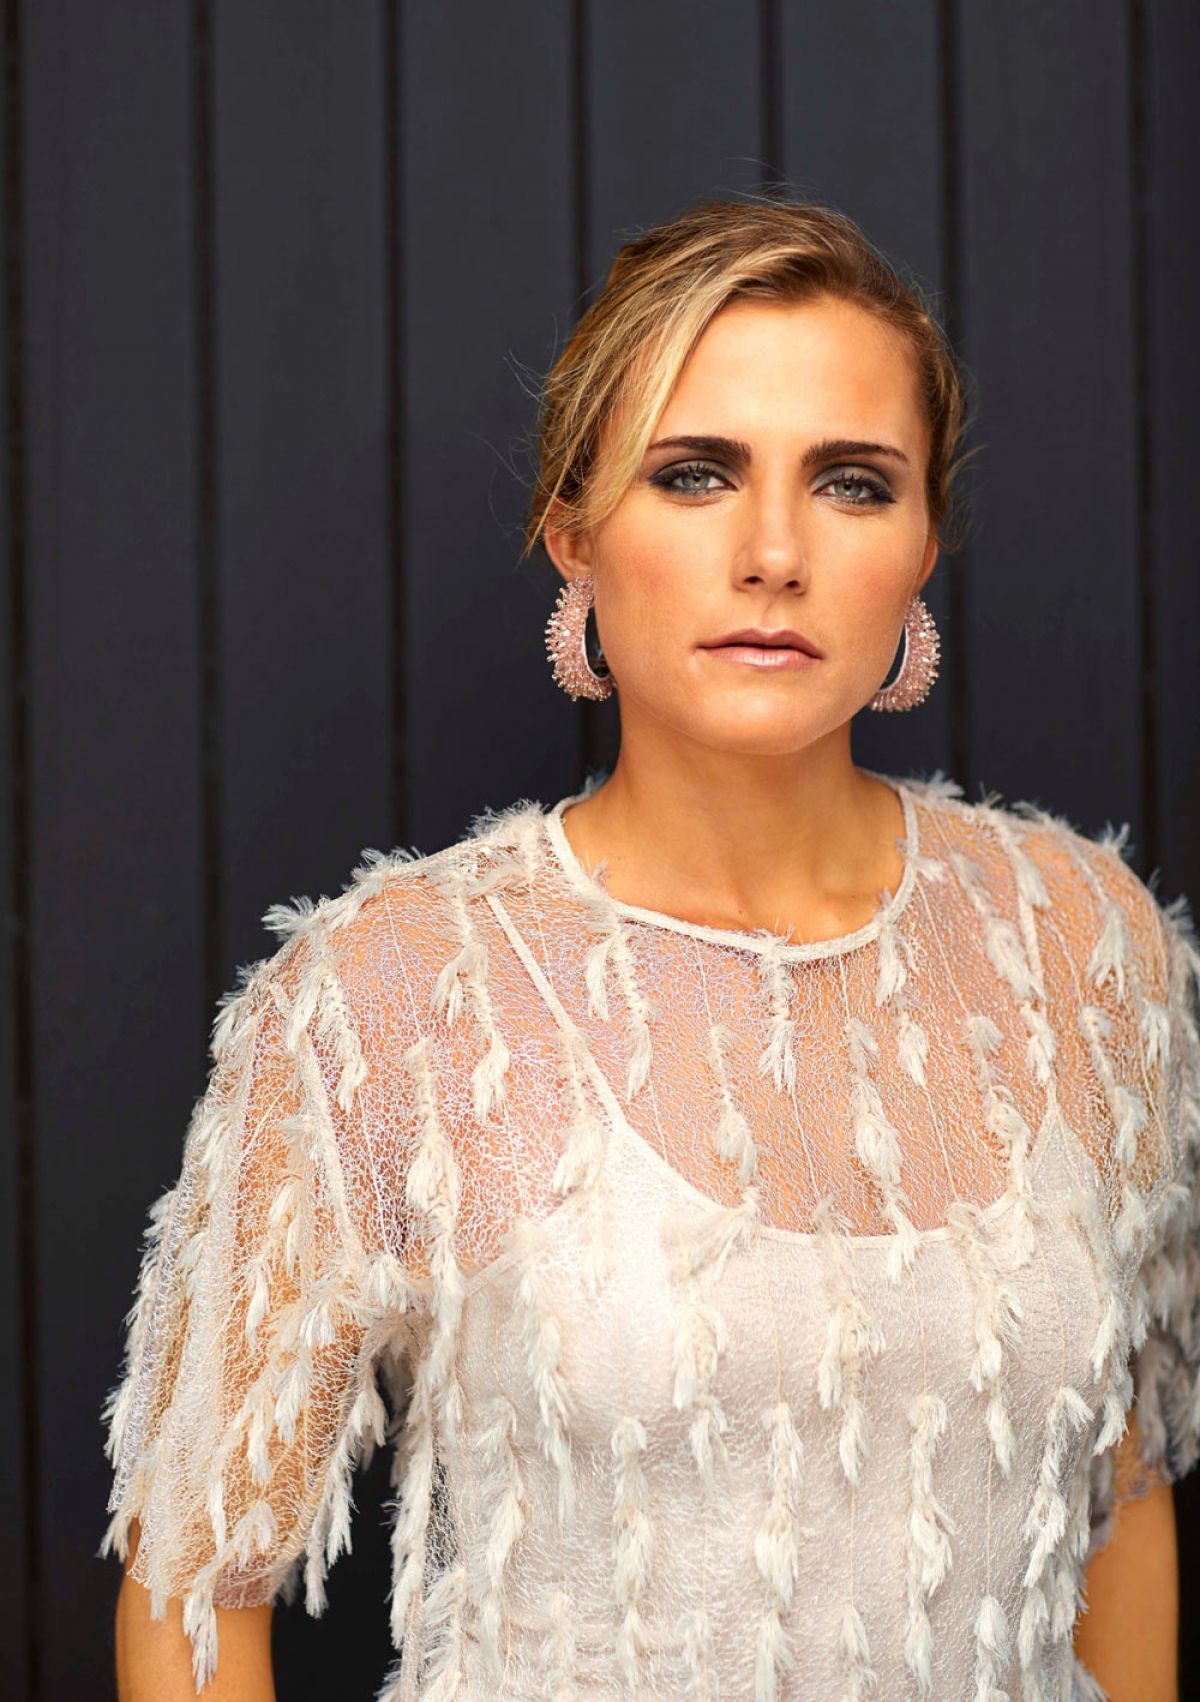 Lexi Thompson for golf.com’s Most Stylish People in Golf, January 2018